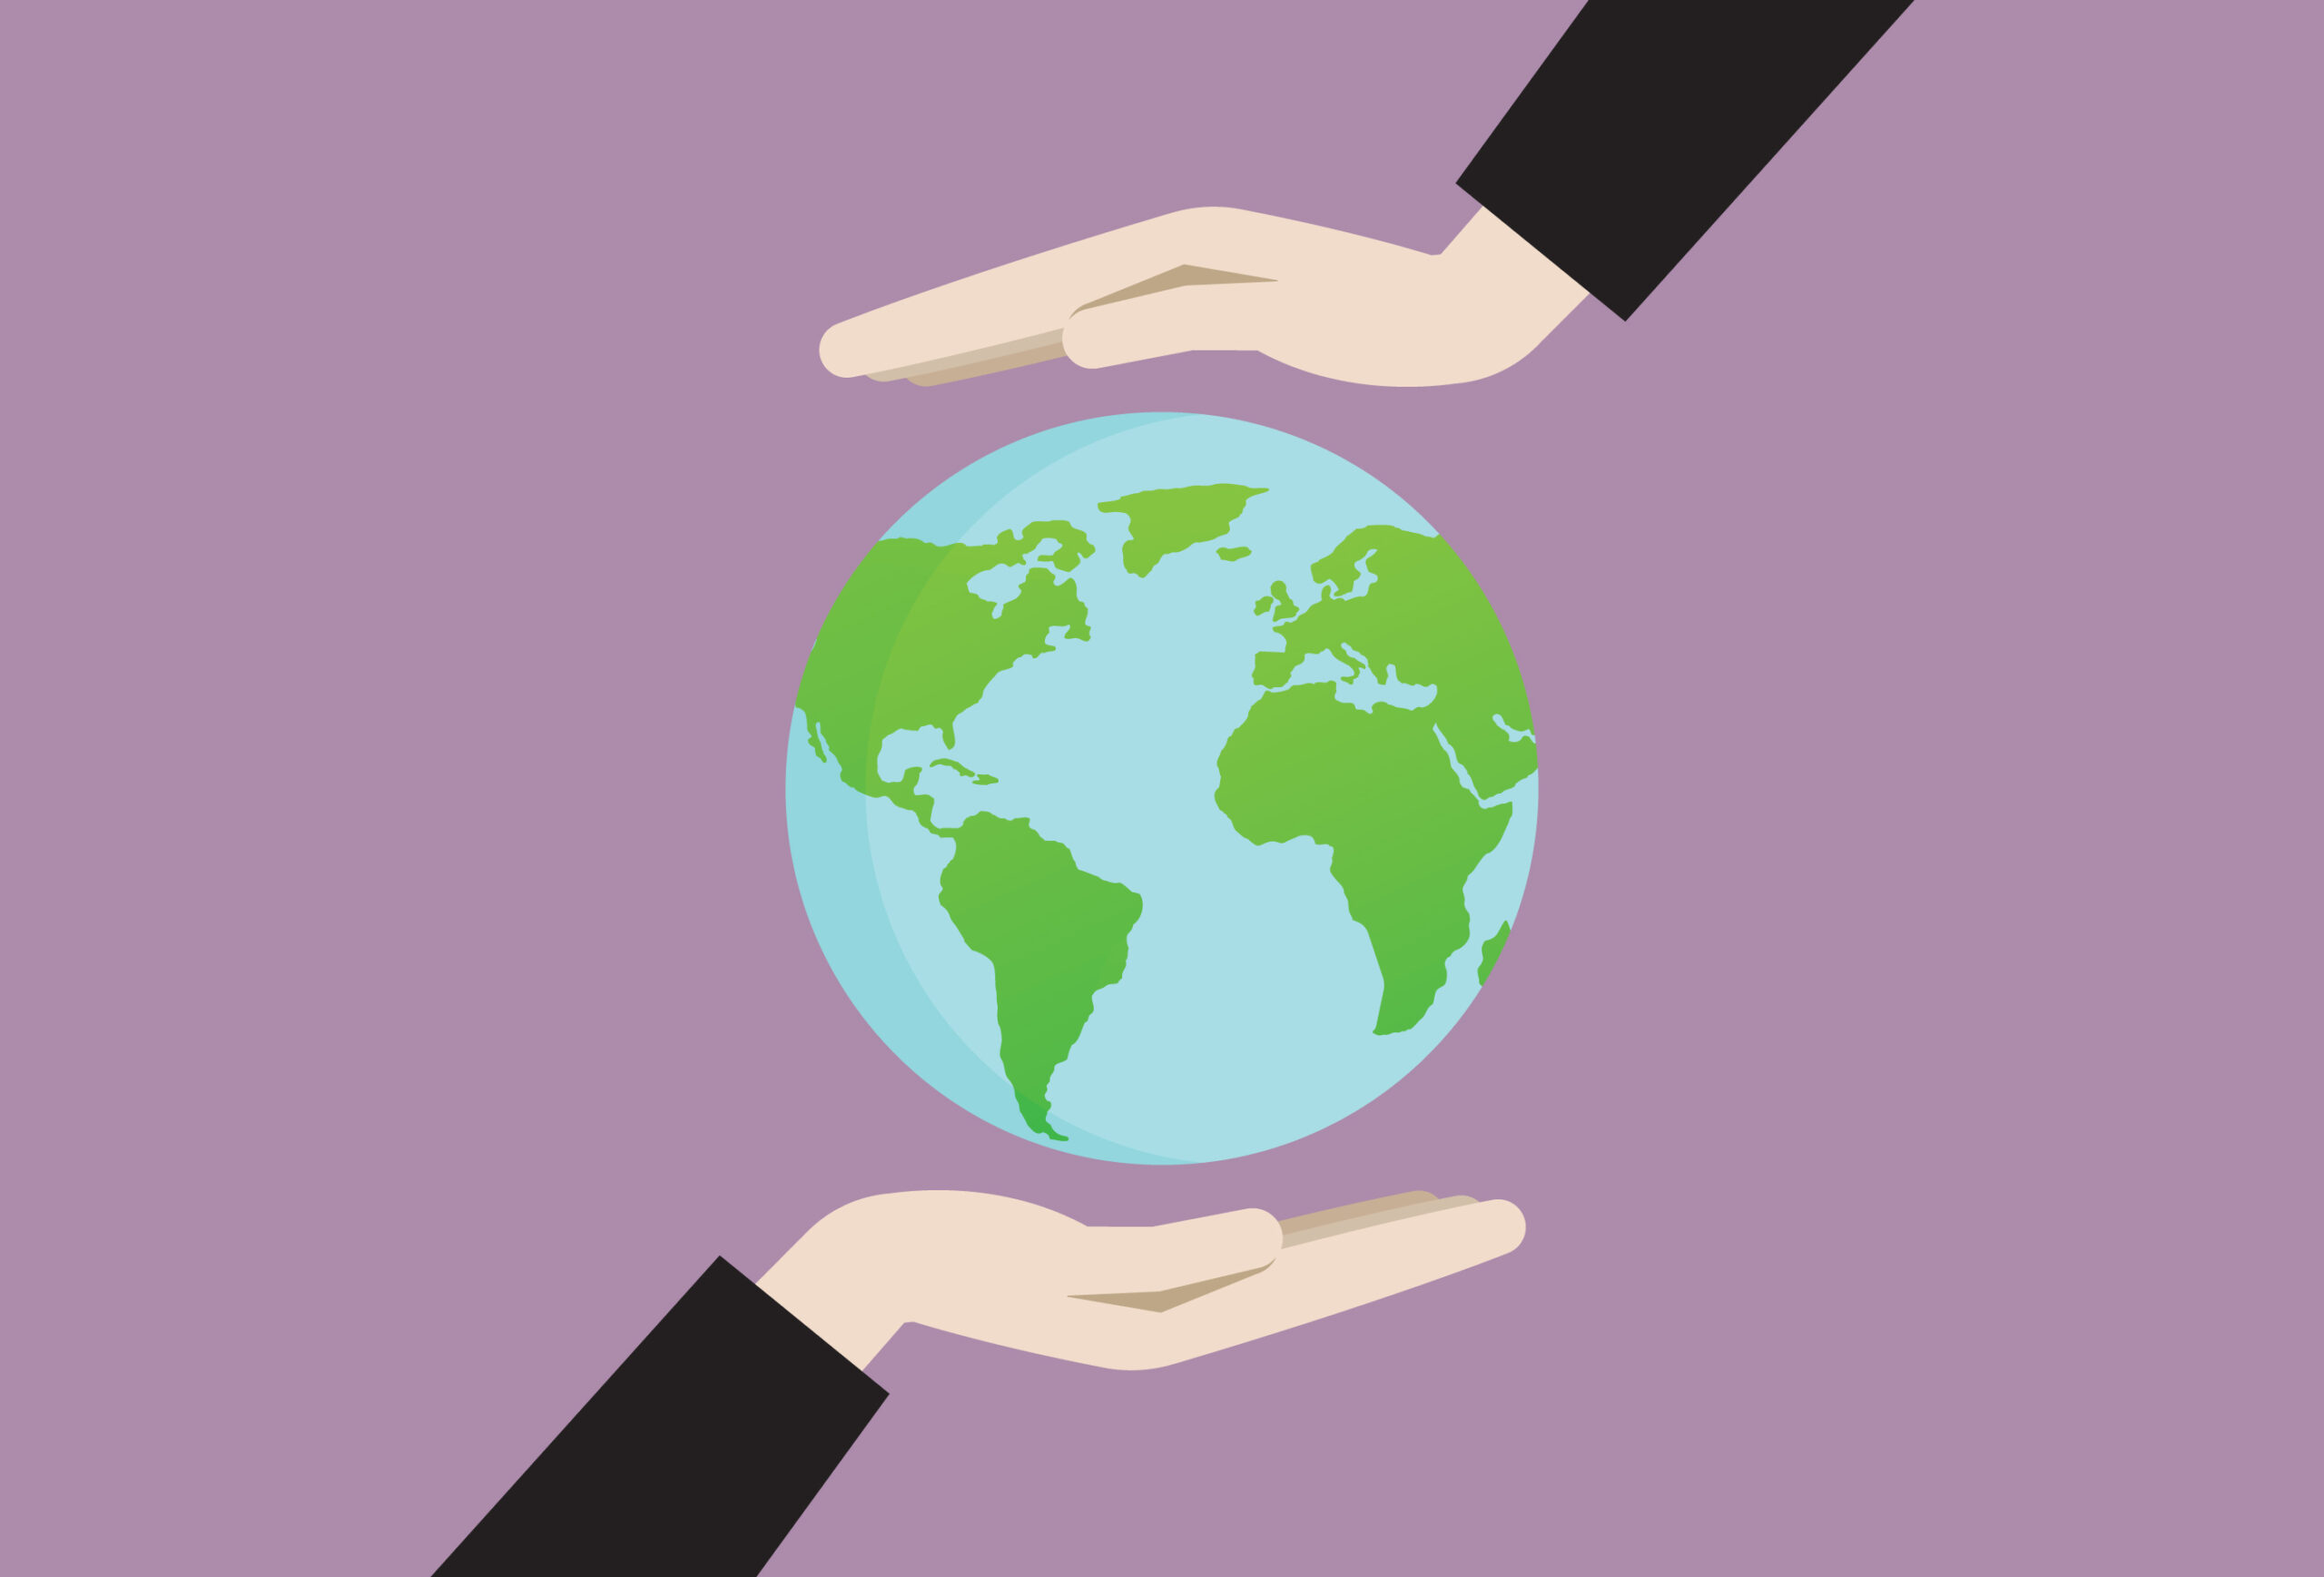 A vector illustration of two hands holding the Earth